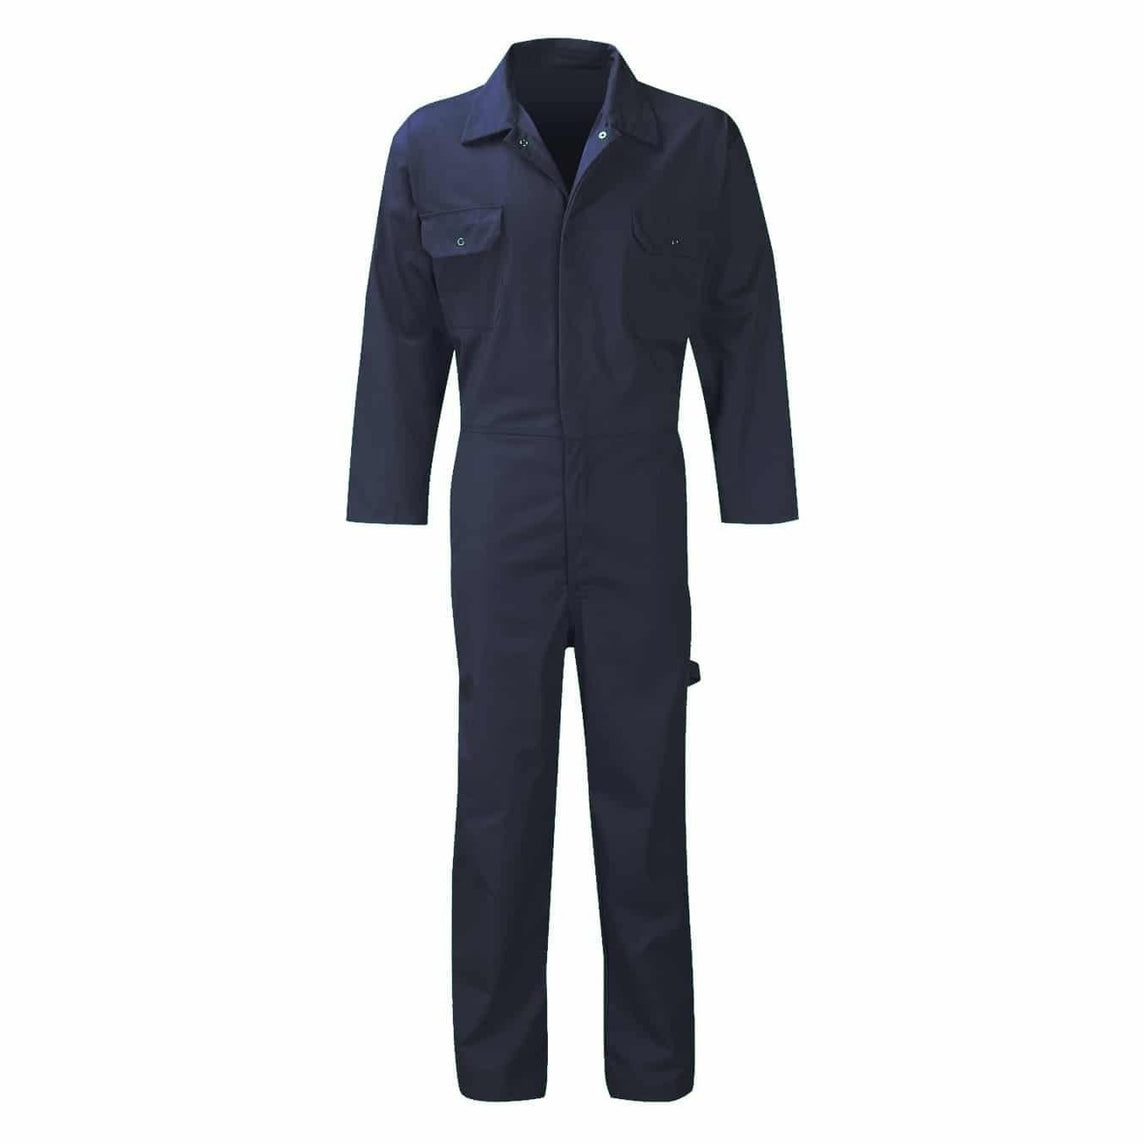 Navy Blue Complete Work Wear Coverall With Belt | Durable & Lightweight | Supply Master Ghana, Accra Safety Clothing Buy Tools hardware Building materials